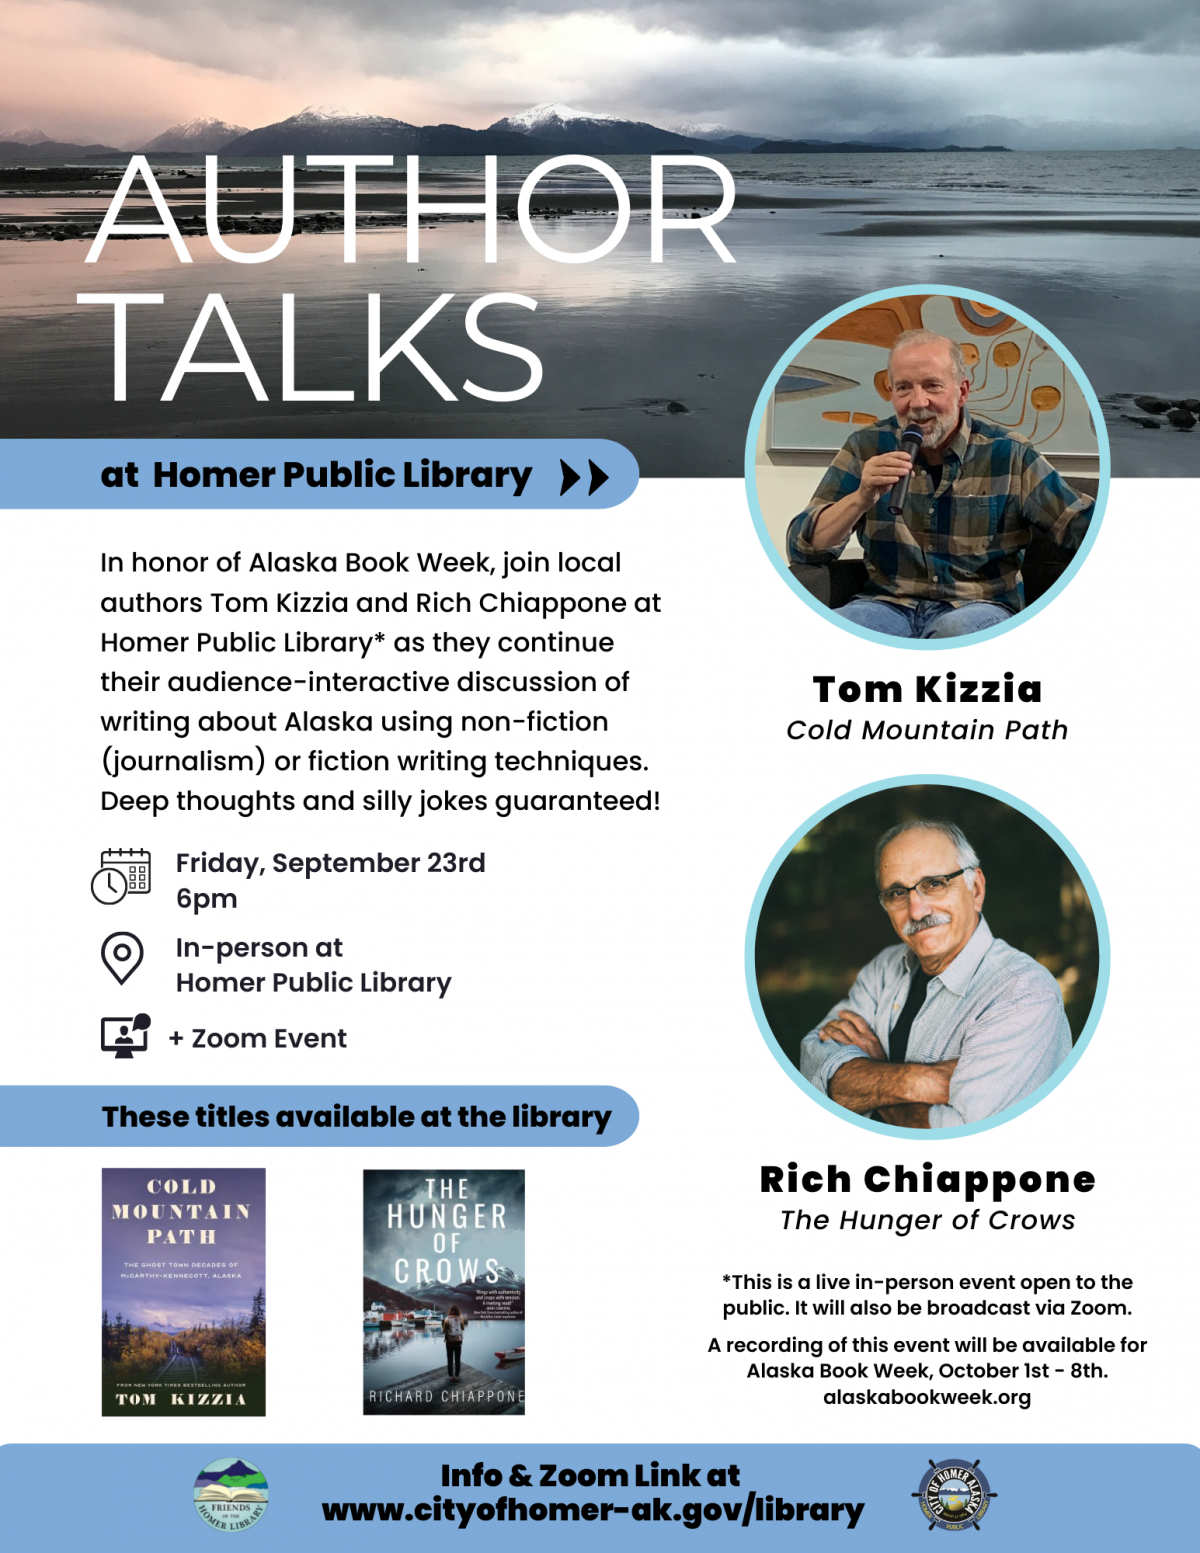 Author Talk with Tom Kizzia and Rich Chiappone